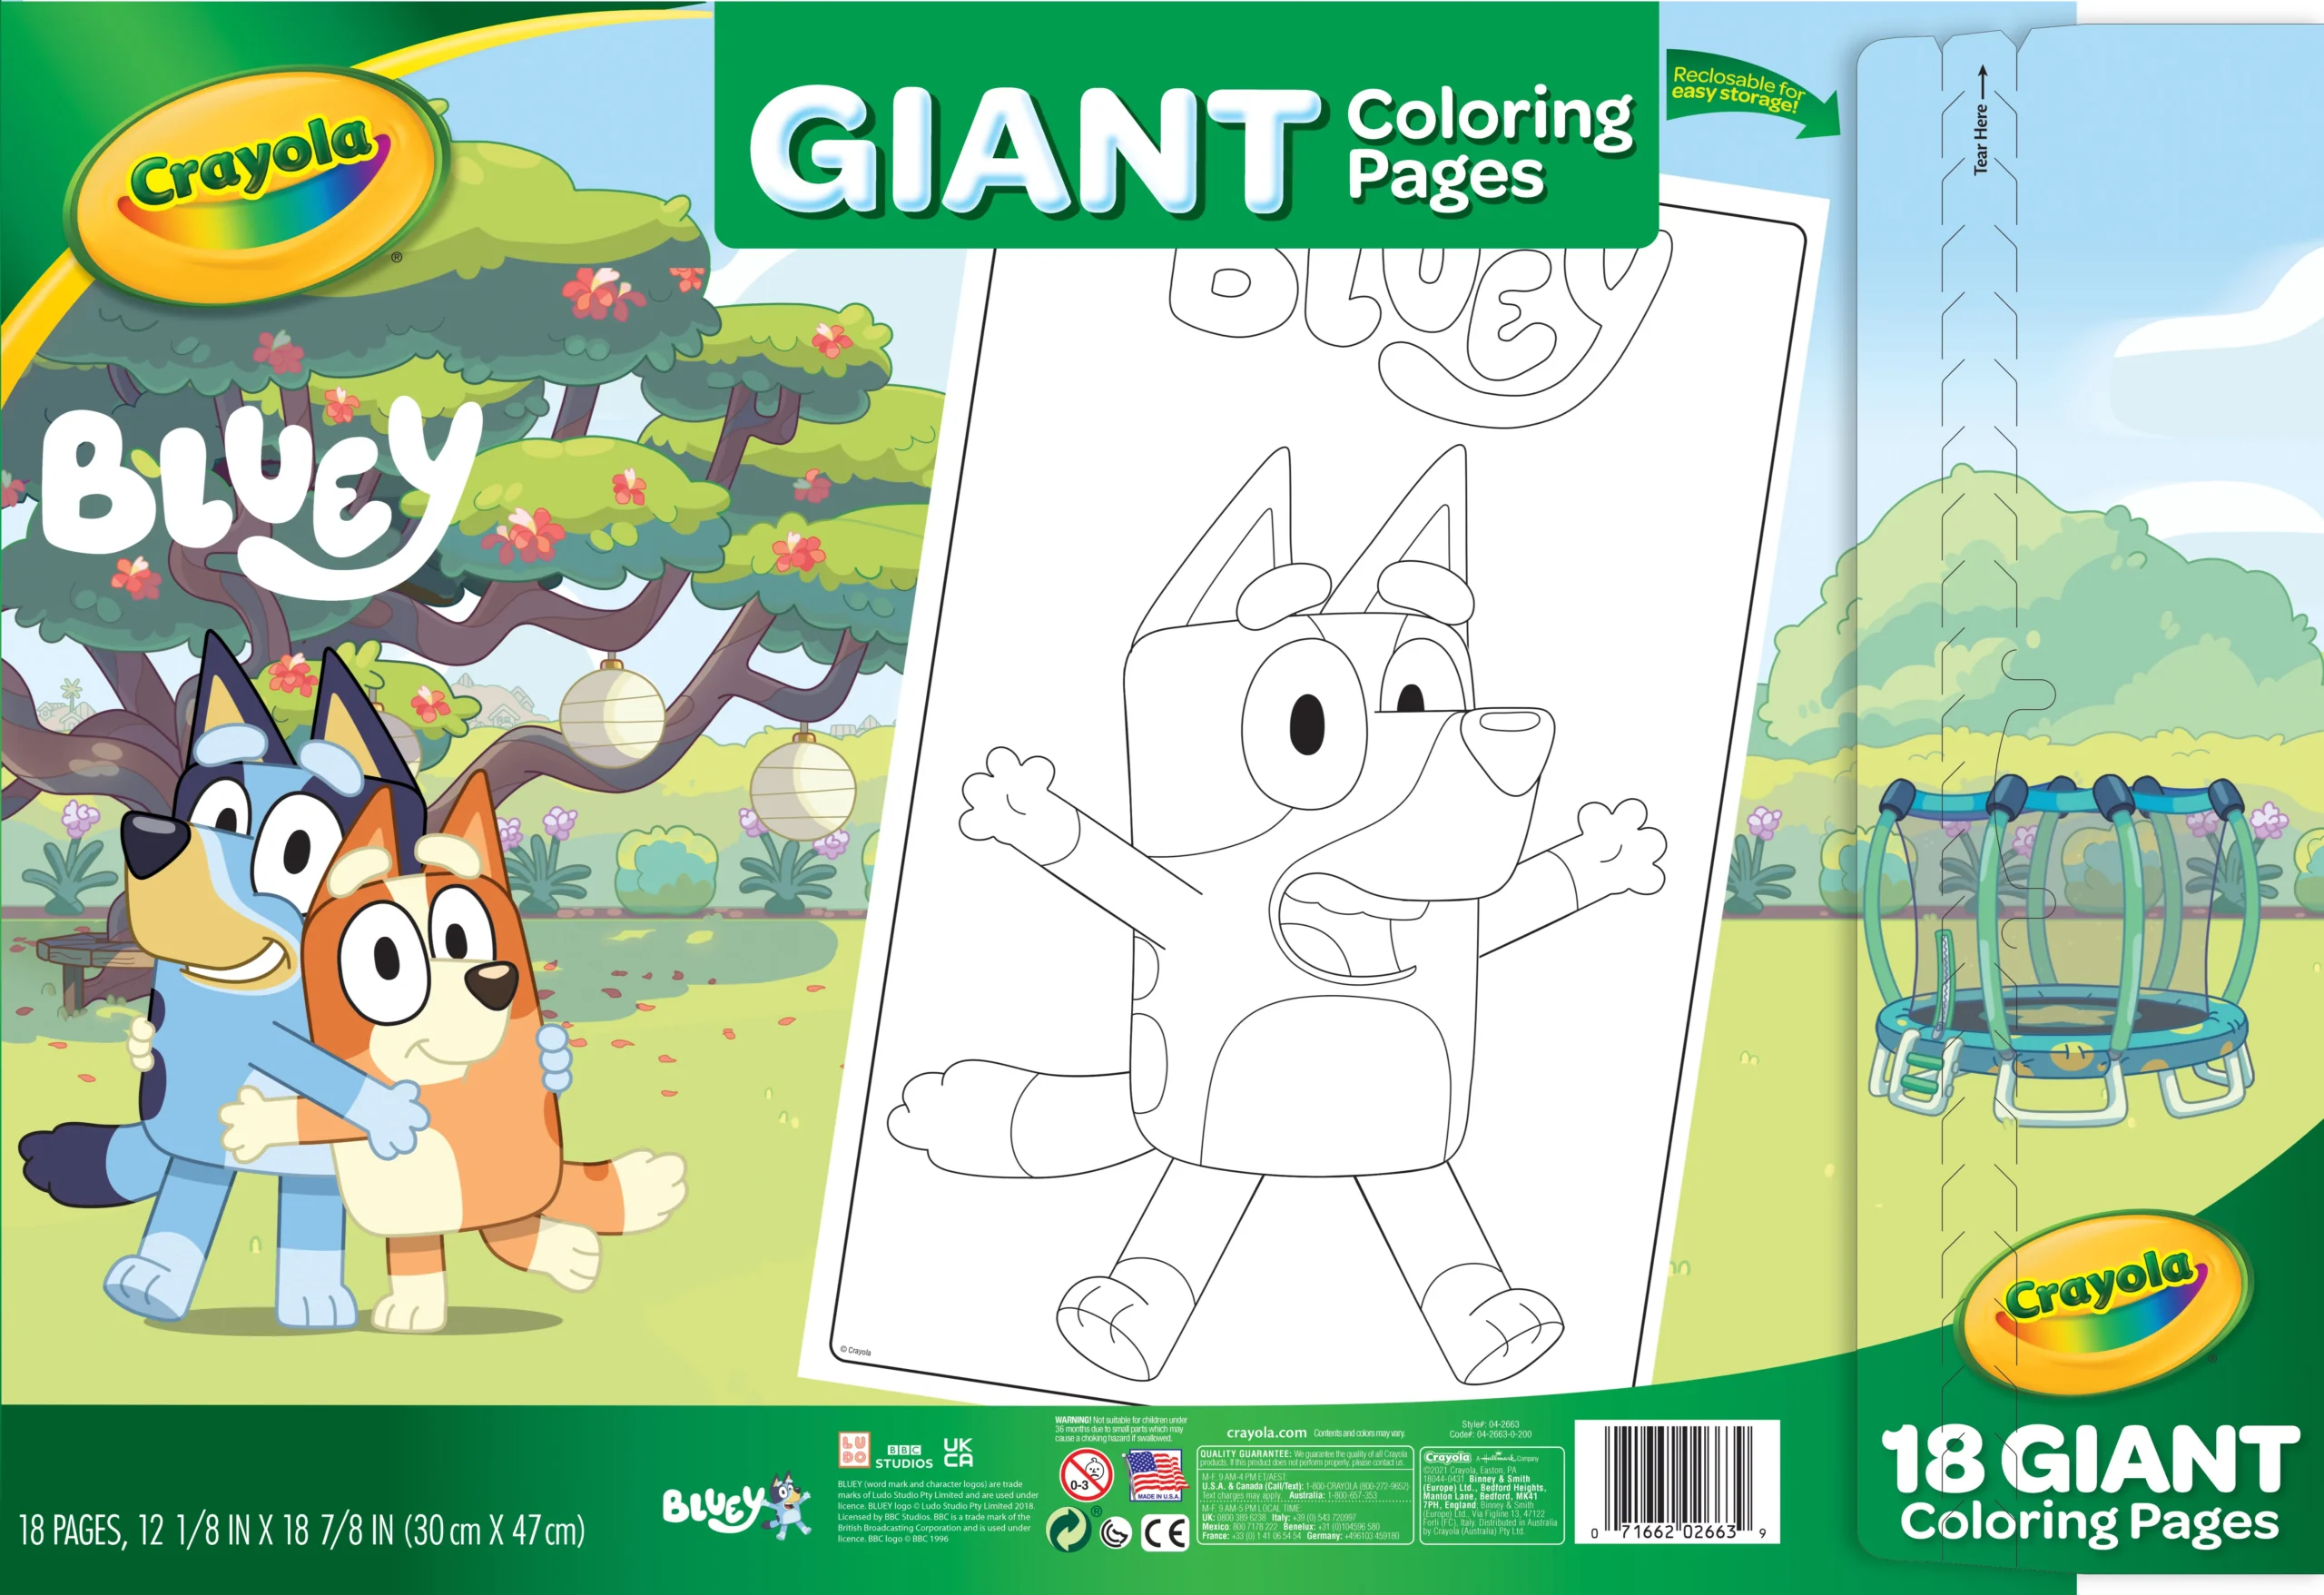 https://www.awesometoys.com/wp-content/uploads/2023/01/Giant-Coloring-Pages-Bluey-scaled.webp